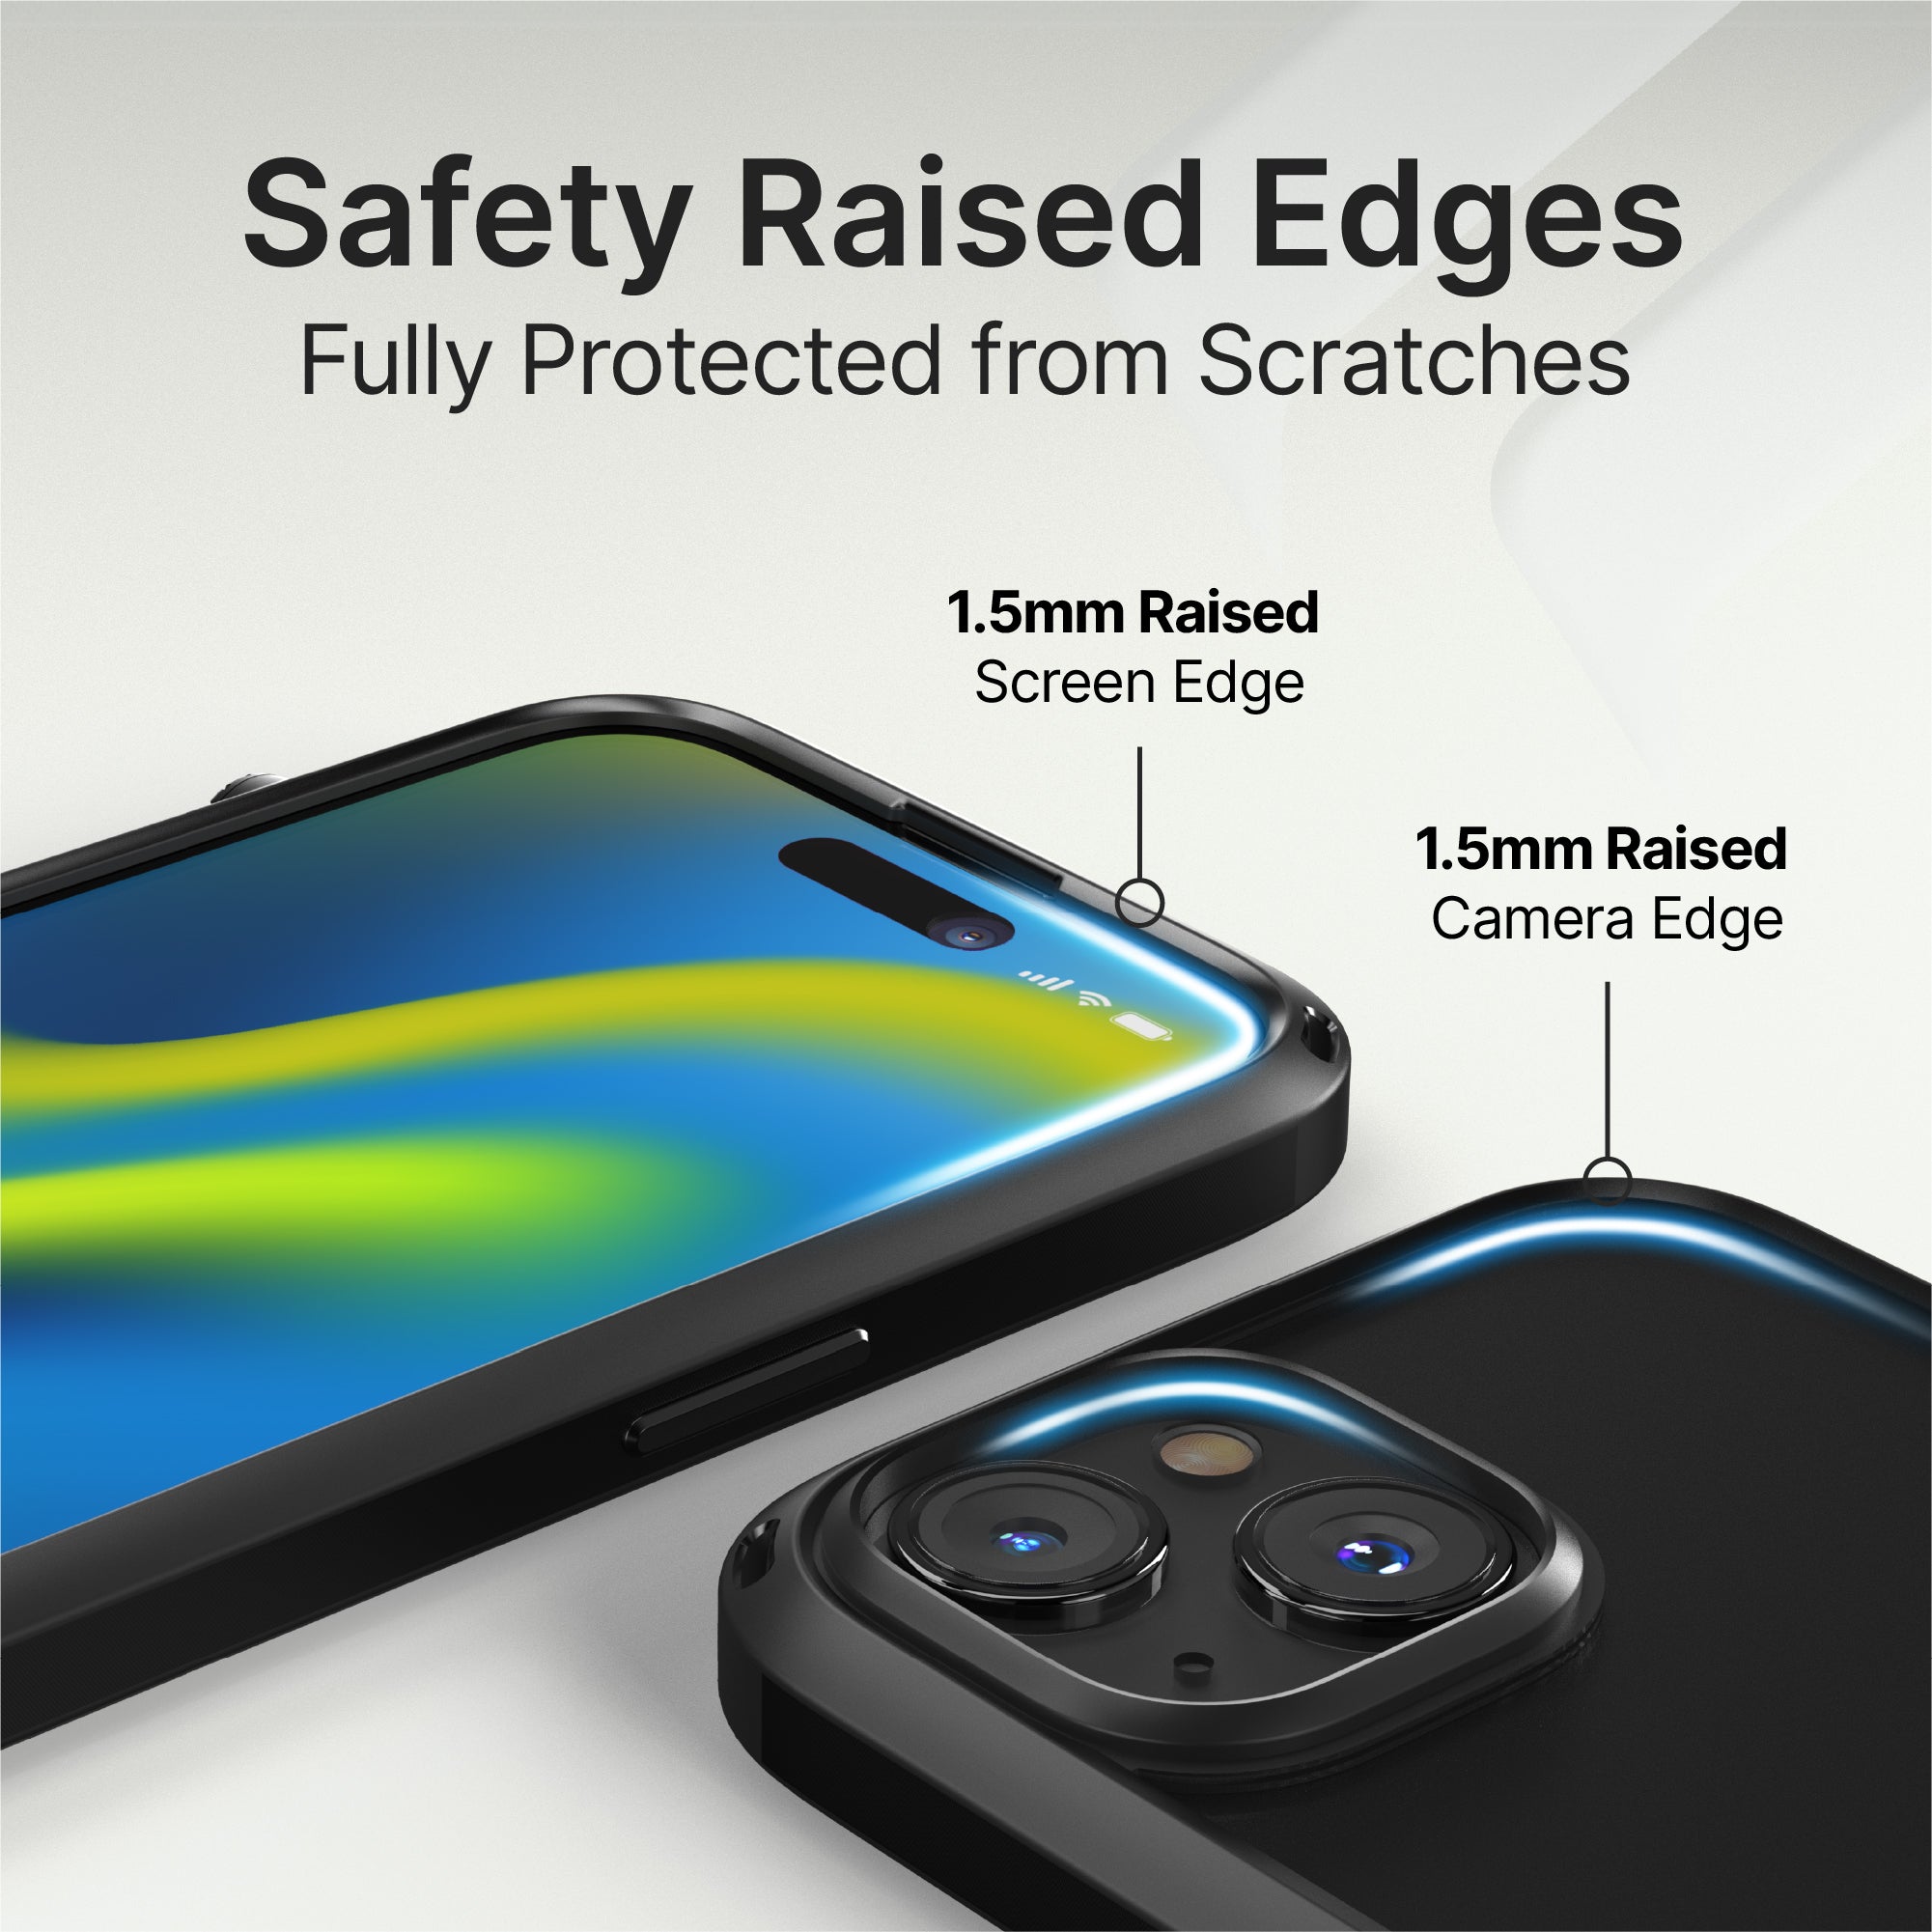 catalyst iphone 15 series influence case magsafe compatible stealth black for iphone 15 showing the safety raised edges for camera and screen text reads safety raised edges fully protected from scratches 1.5mm raised screen edge 1.5mm raised camera edge